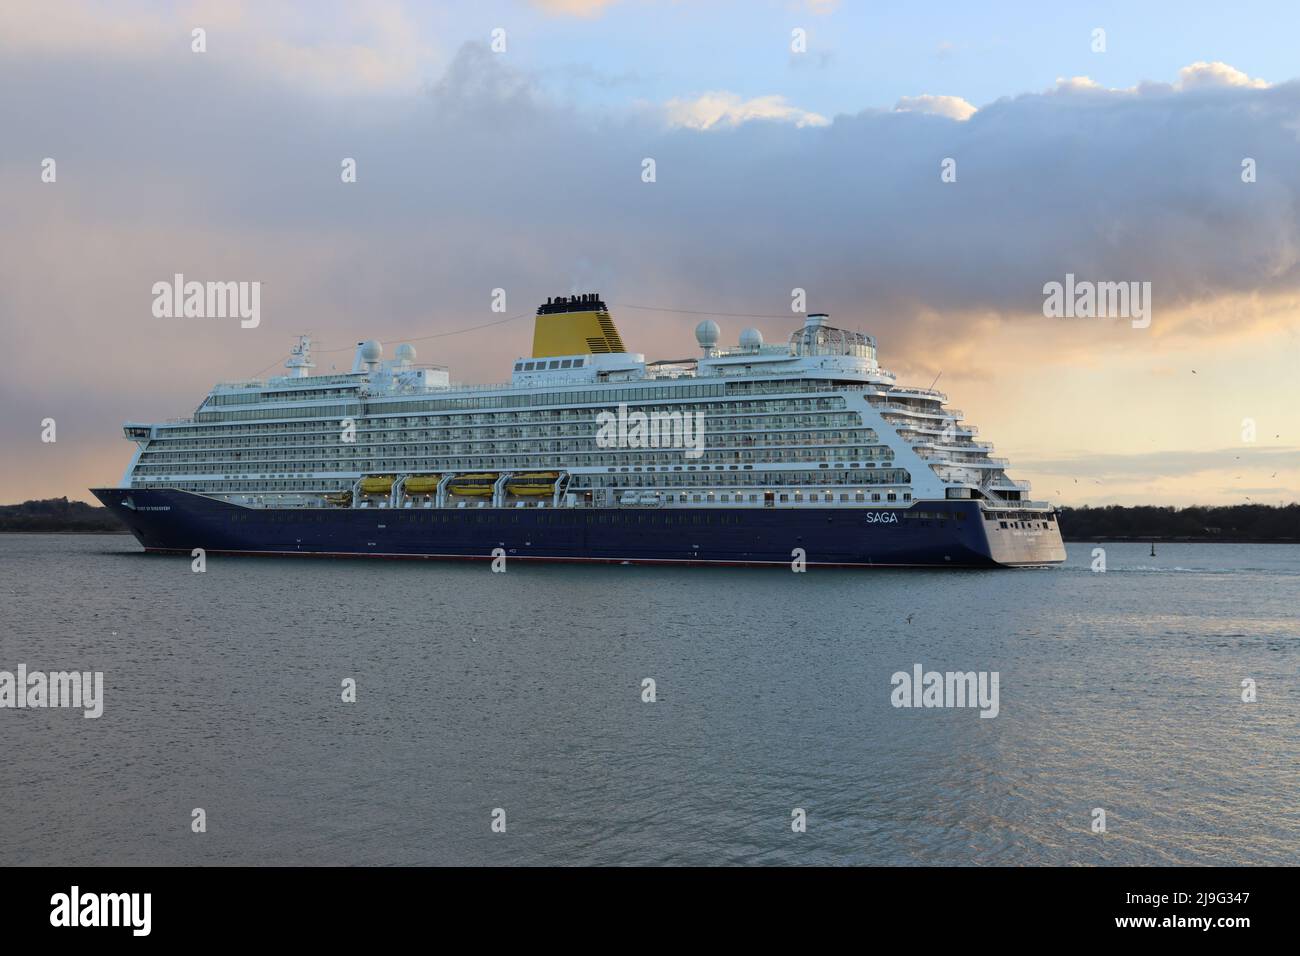 The Spirit of Discovery cruise ship 58,000 tons operated by Saga Cruises, departs Southampton Stock Photo